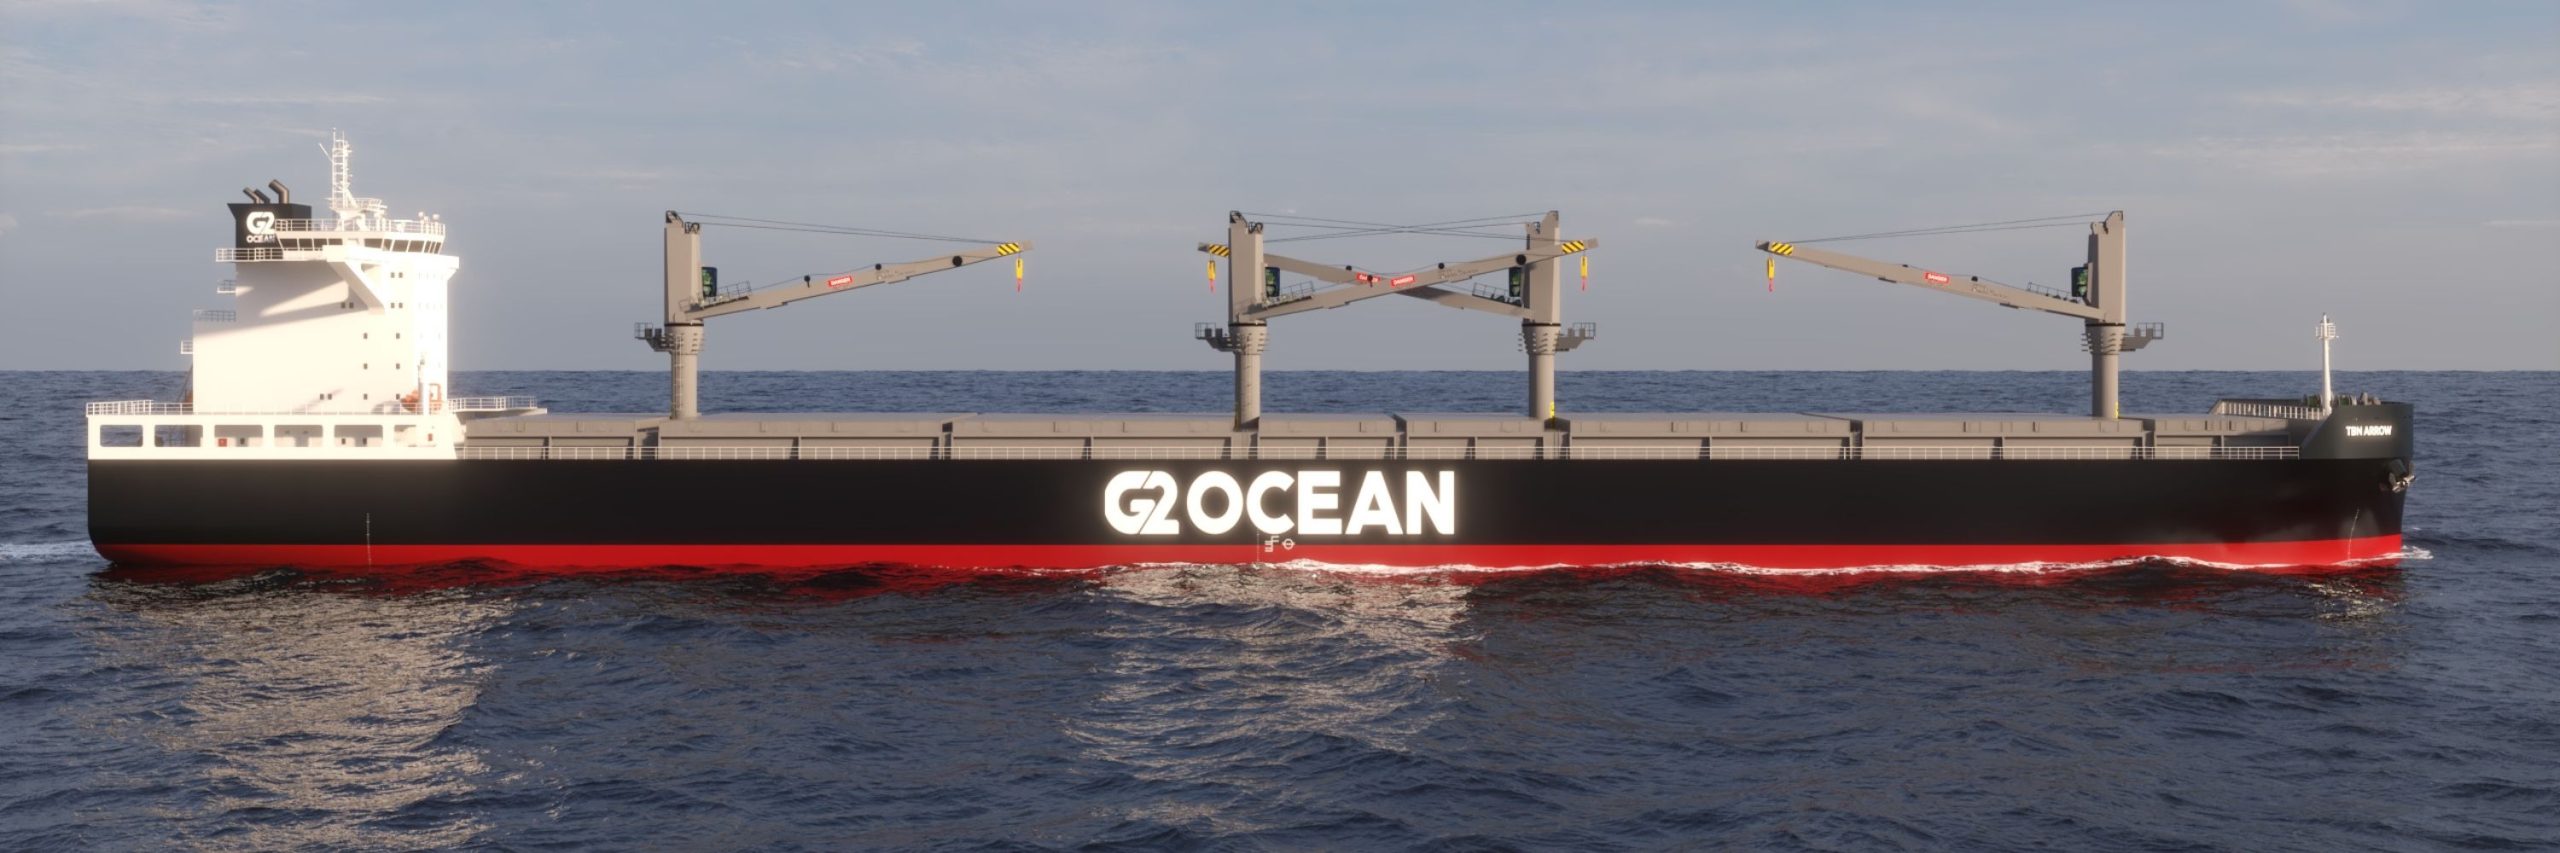 G2 Ocean fleet expands with up to four additional dual-fuel vessels